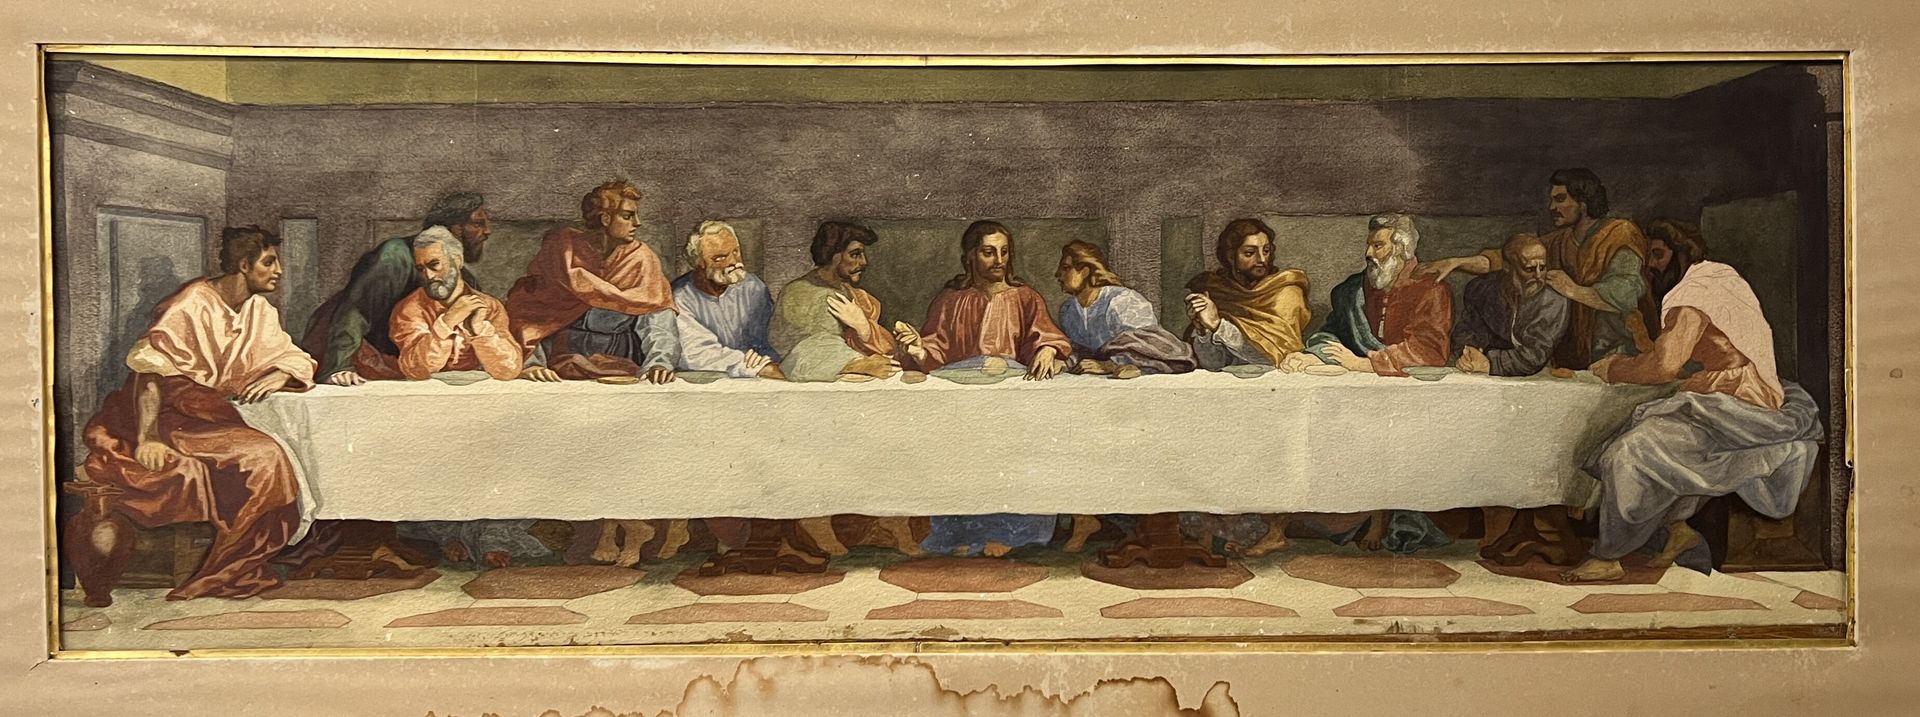 Null 19th CENTURY FRENCH SCHOOL

The Last Supper, after the composition by Andre&hellip;